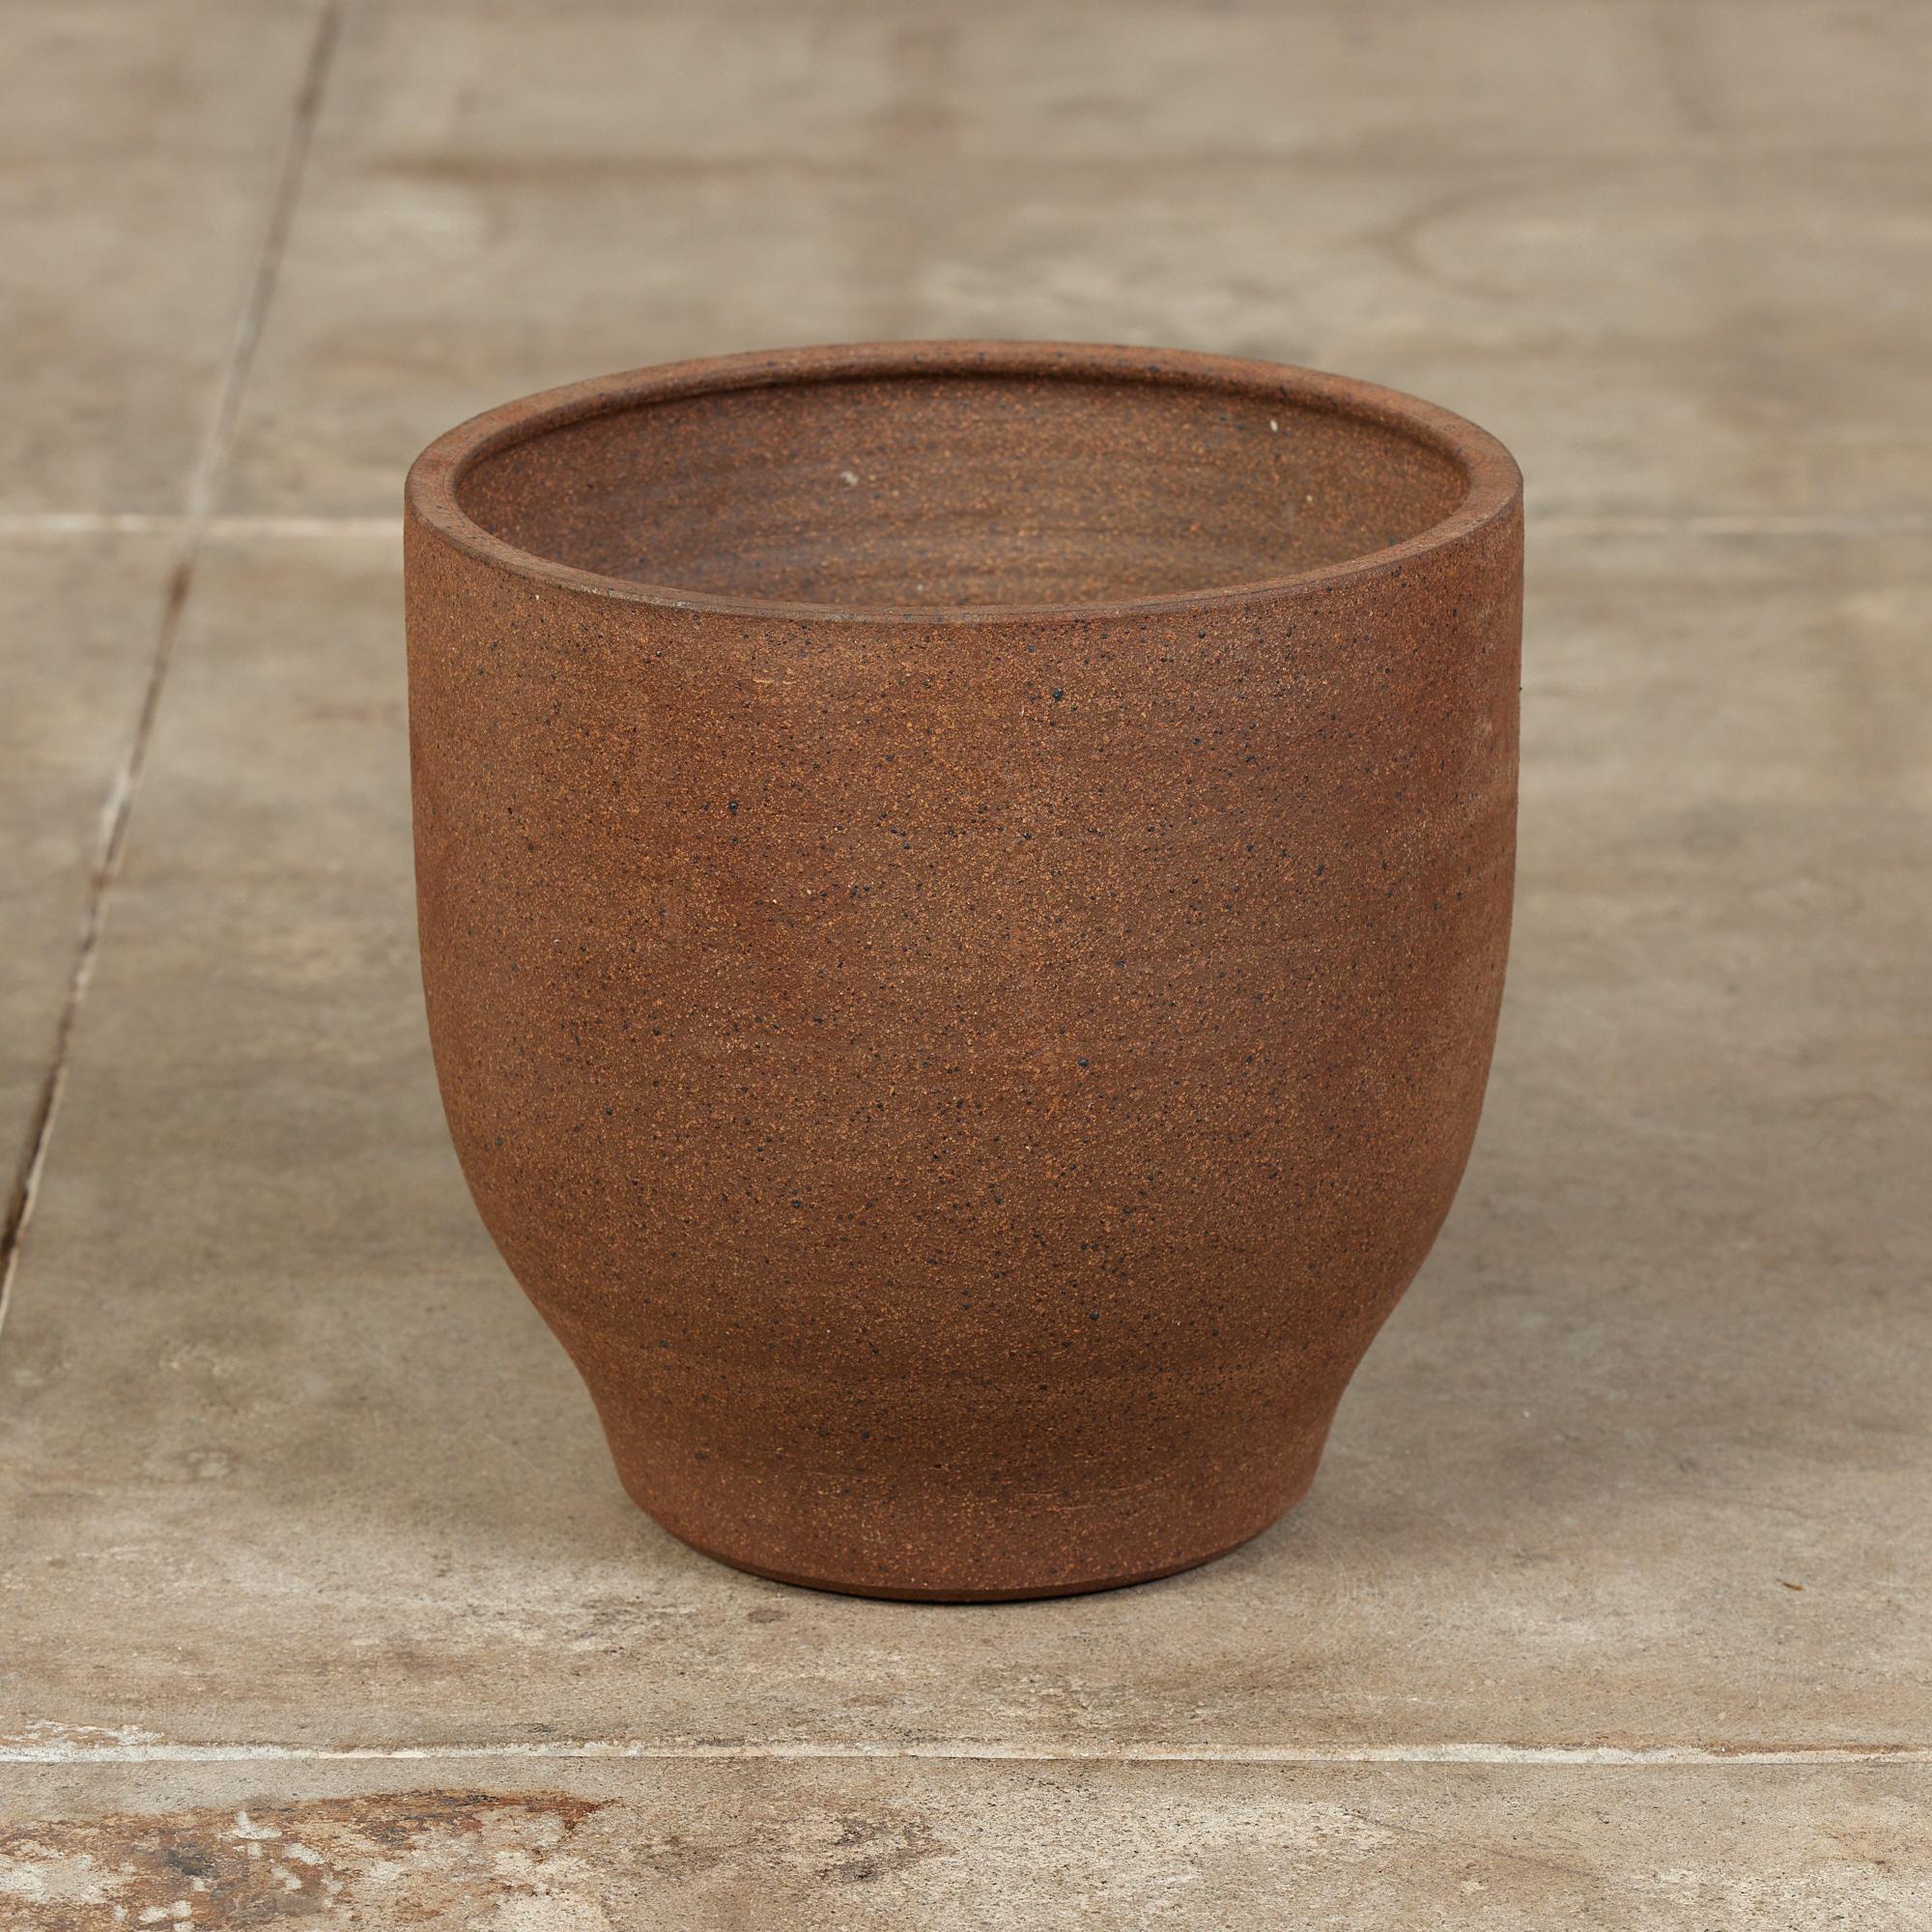 Stoneware planter, circa 1970s, USA, is a result of the collaboration between David Cressey & Robert Maxwell to create the line Earthgender. This hand thrown planter features an unglazed stoneware interior and exterior. 

Dimensions
9.75